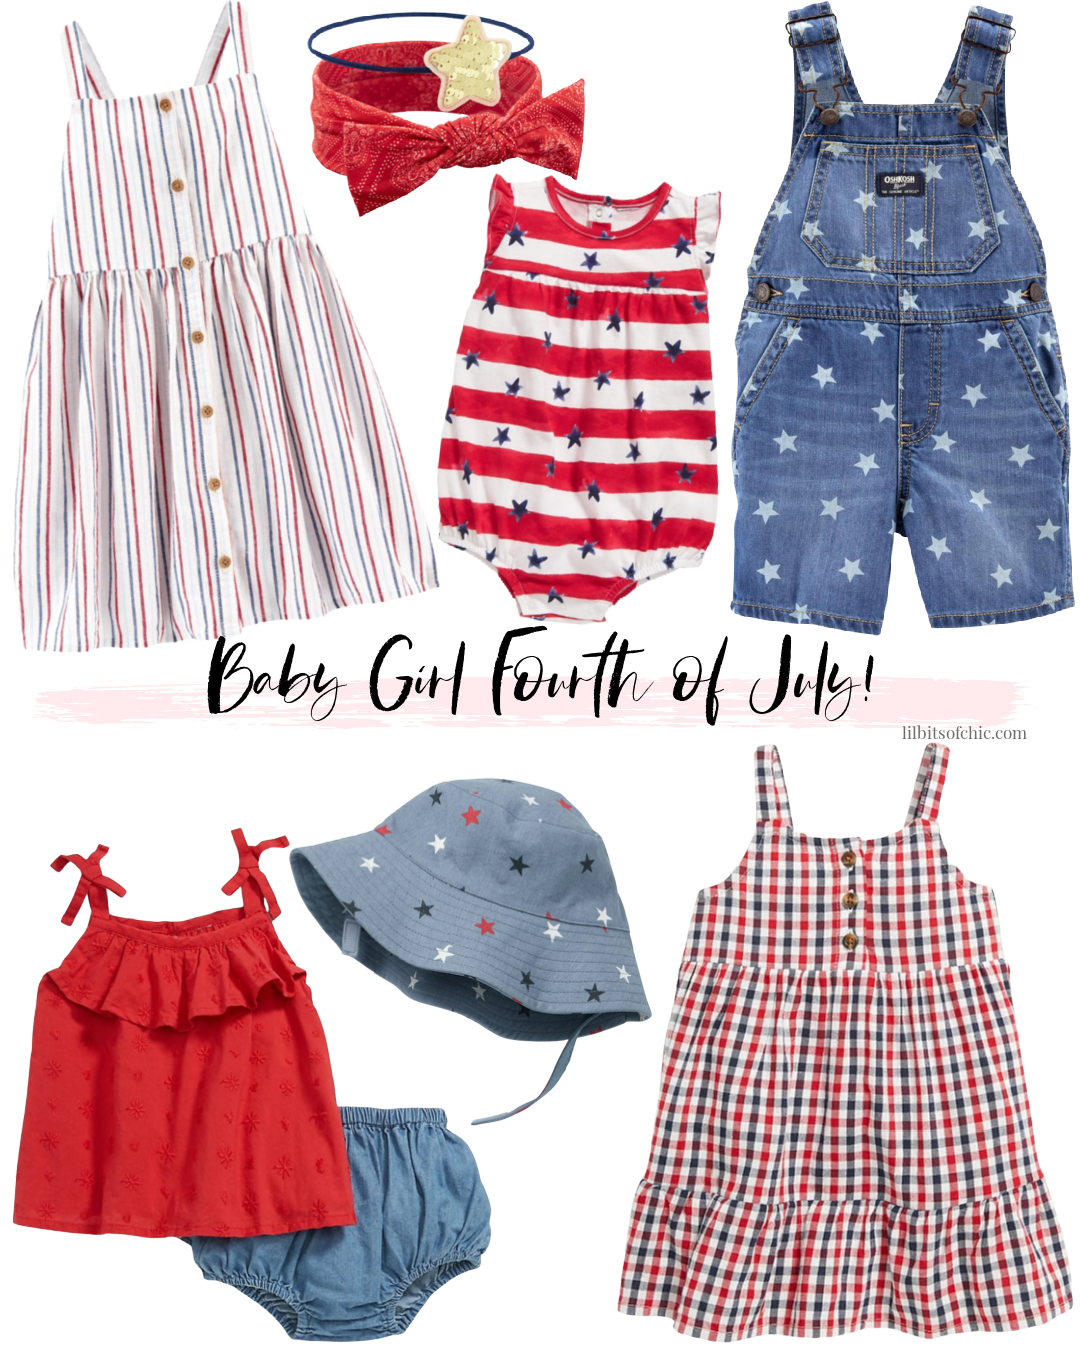 Baby girl fourth of July, old navy fourth of july pieces for baby girl, Fourth of July Outfit Ideas for baby girl and toddler boy